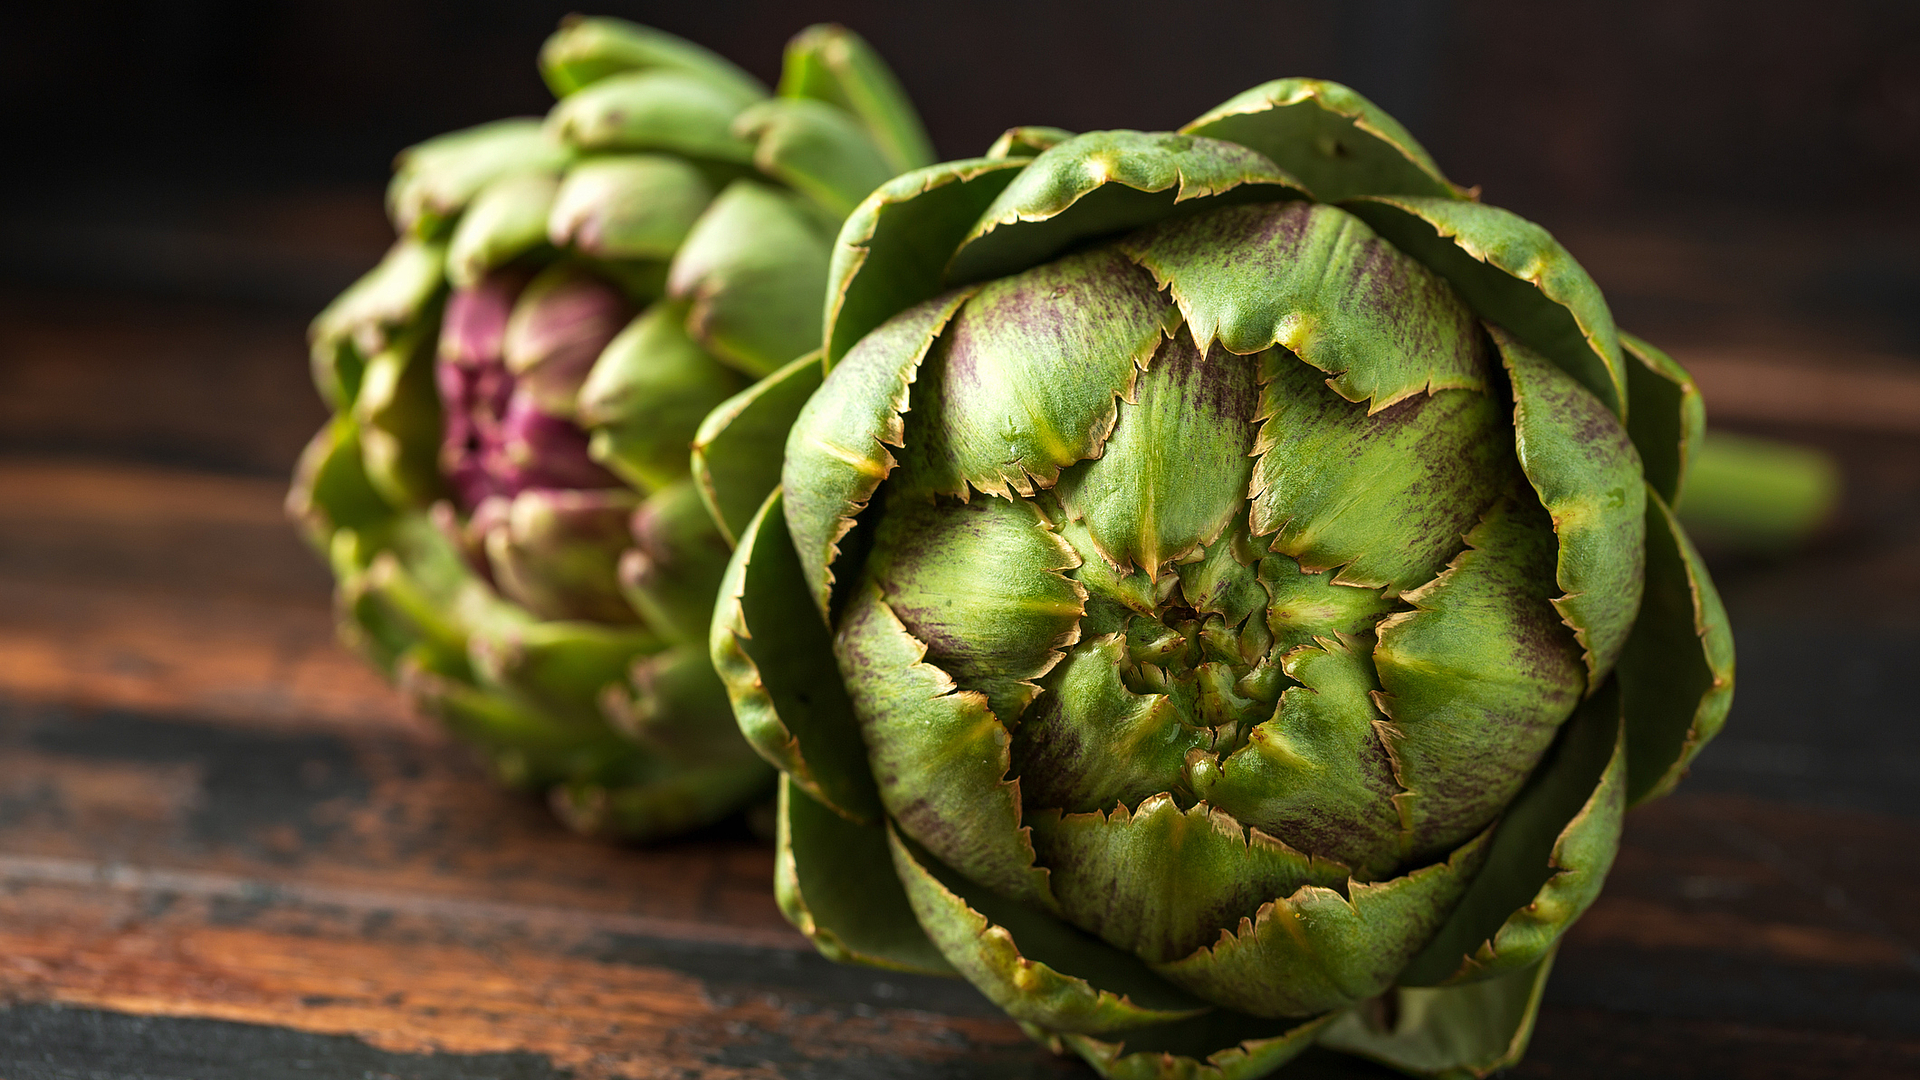 Add fresh artichokes to your plate in an instant 